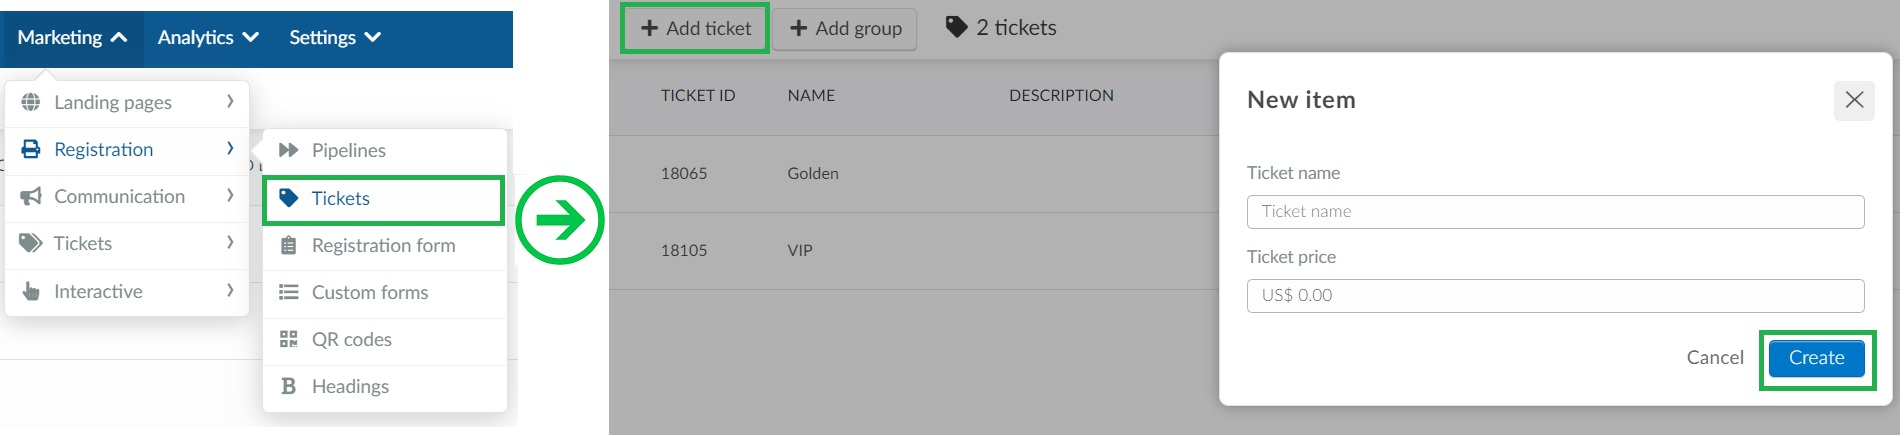 How to create a ticket